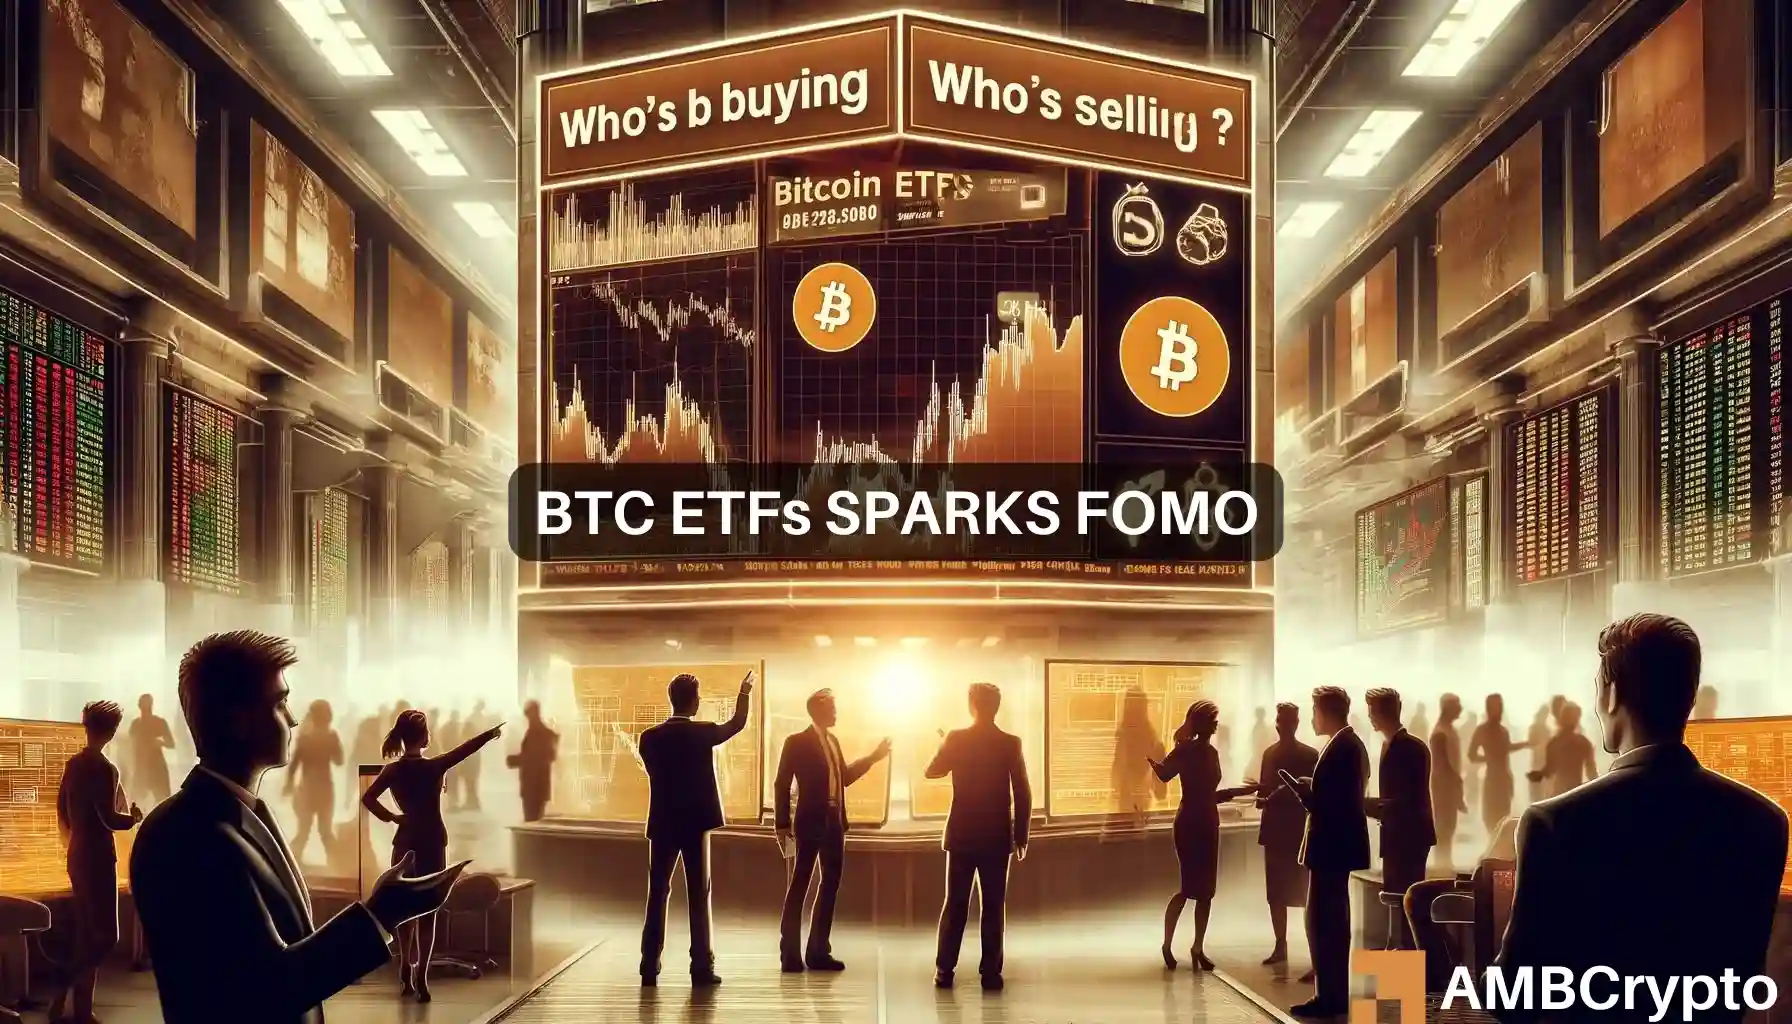 Bitcoin ETFs see surging interest: Who’s buying and who’s selling?